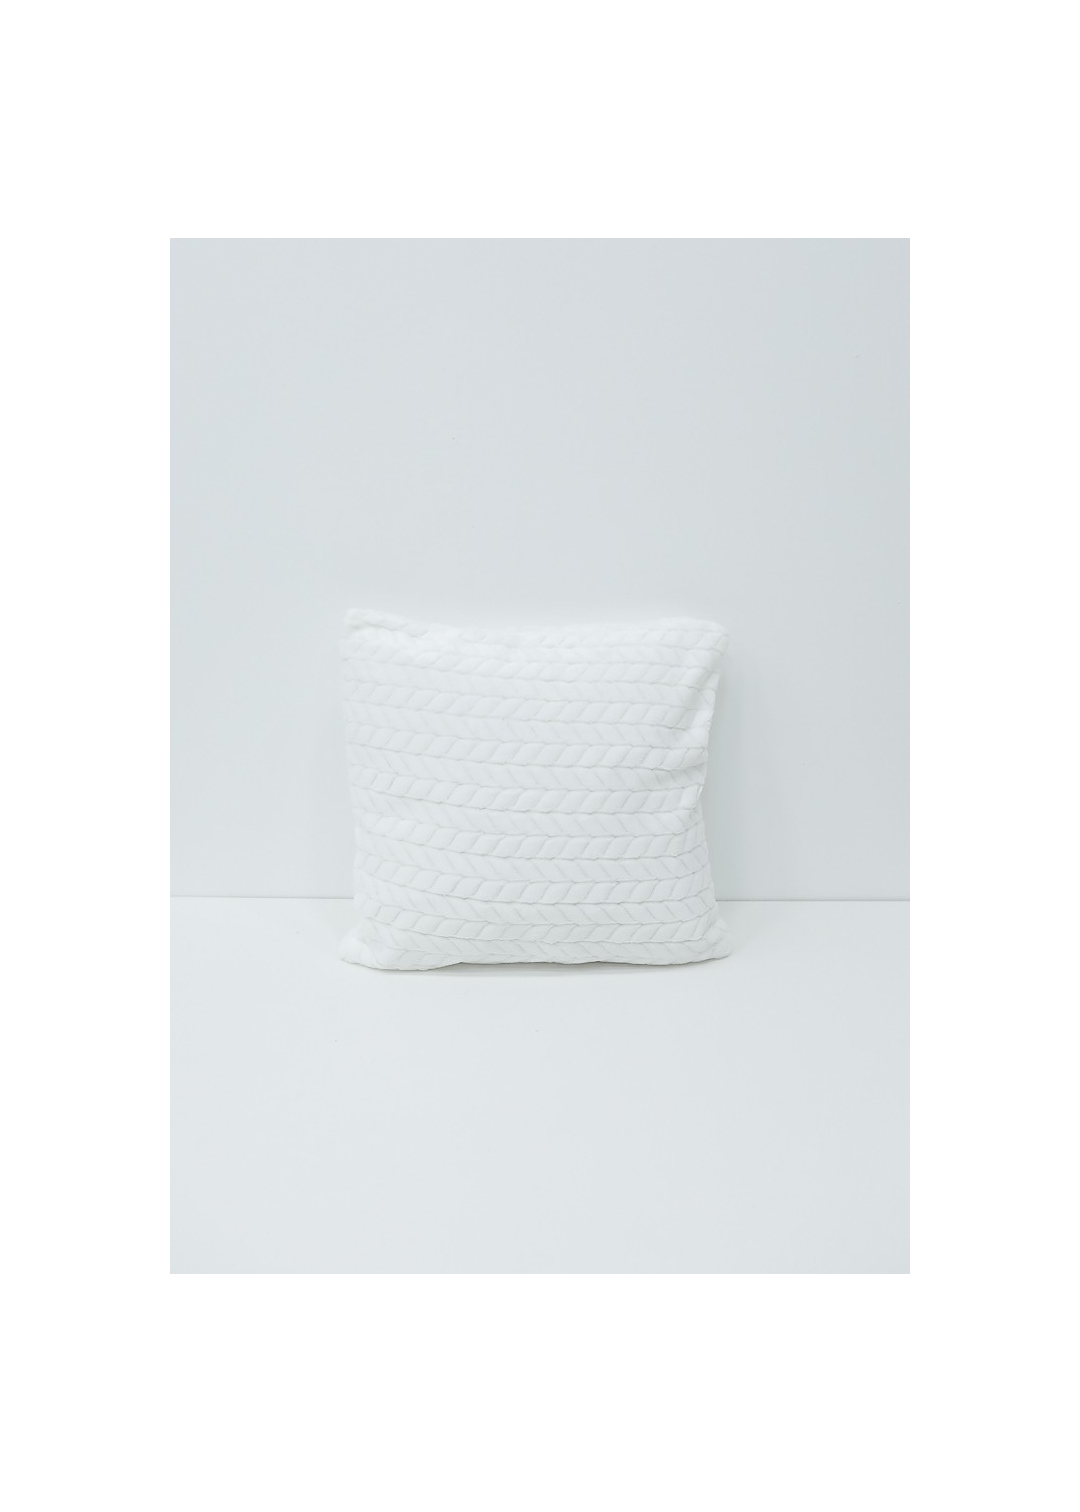 IVORY SOFT TOUCH CUSHION